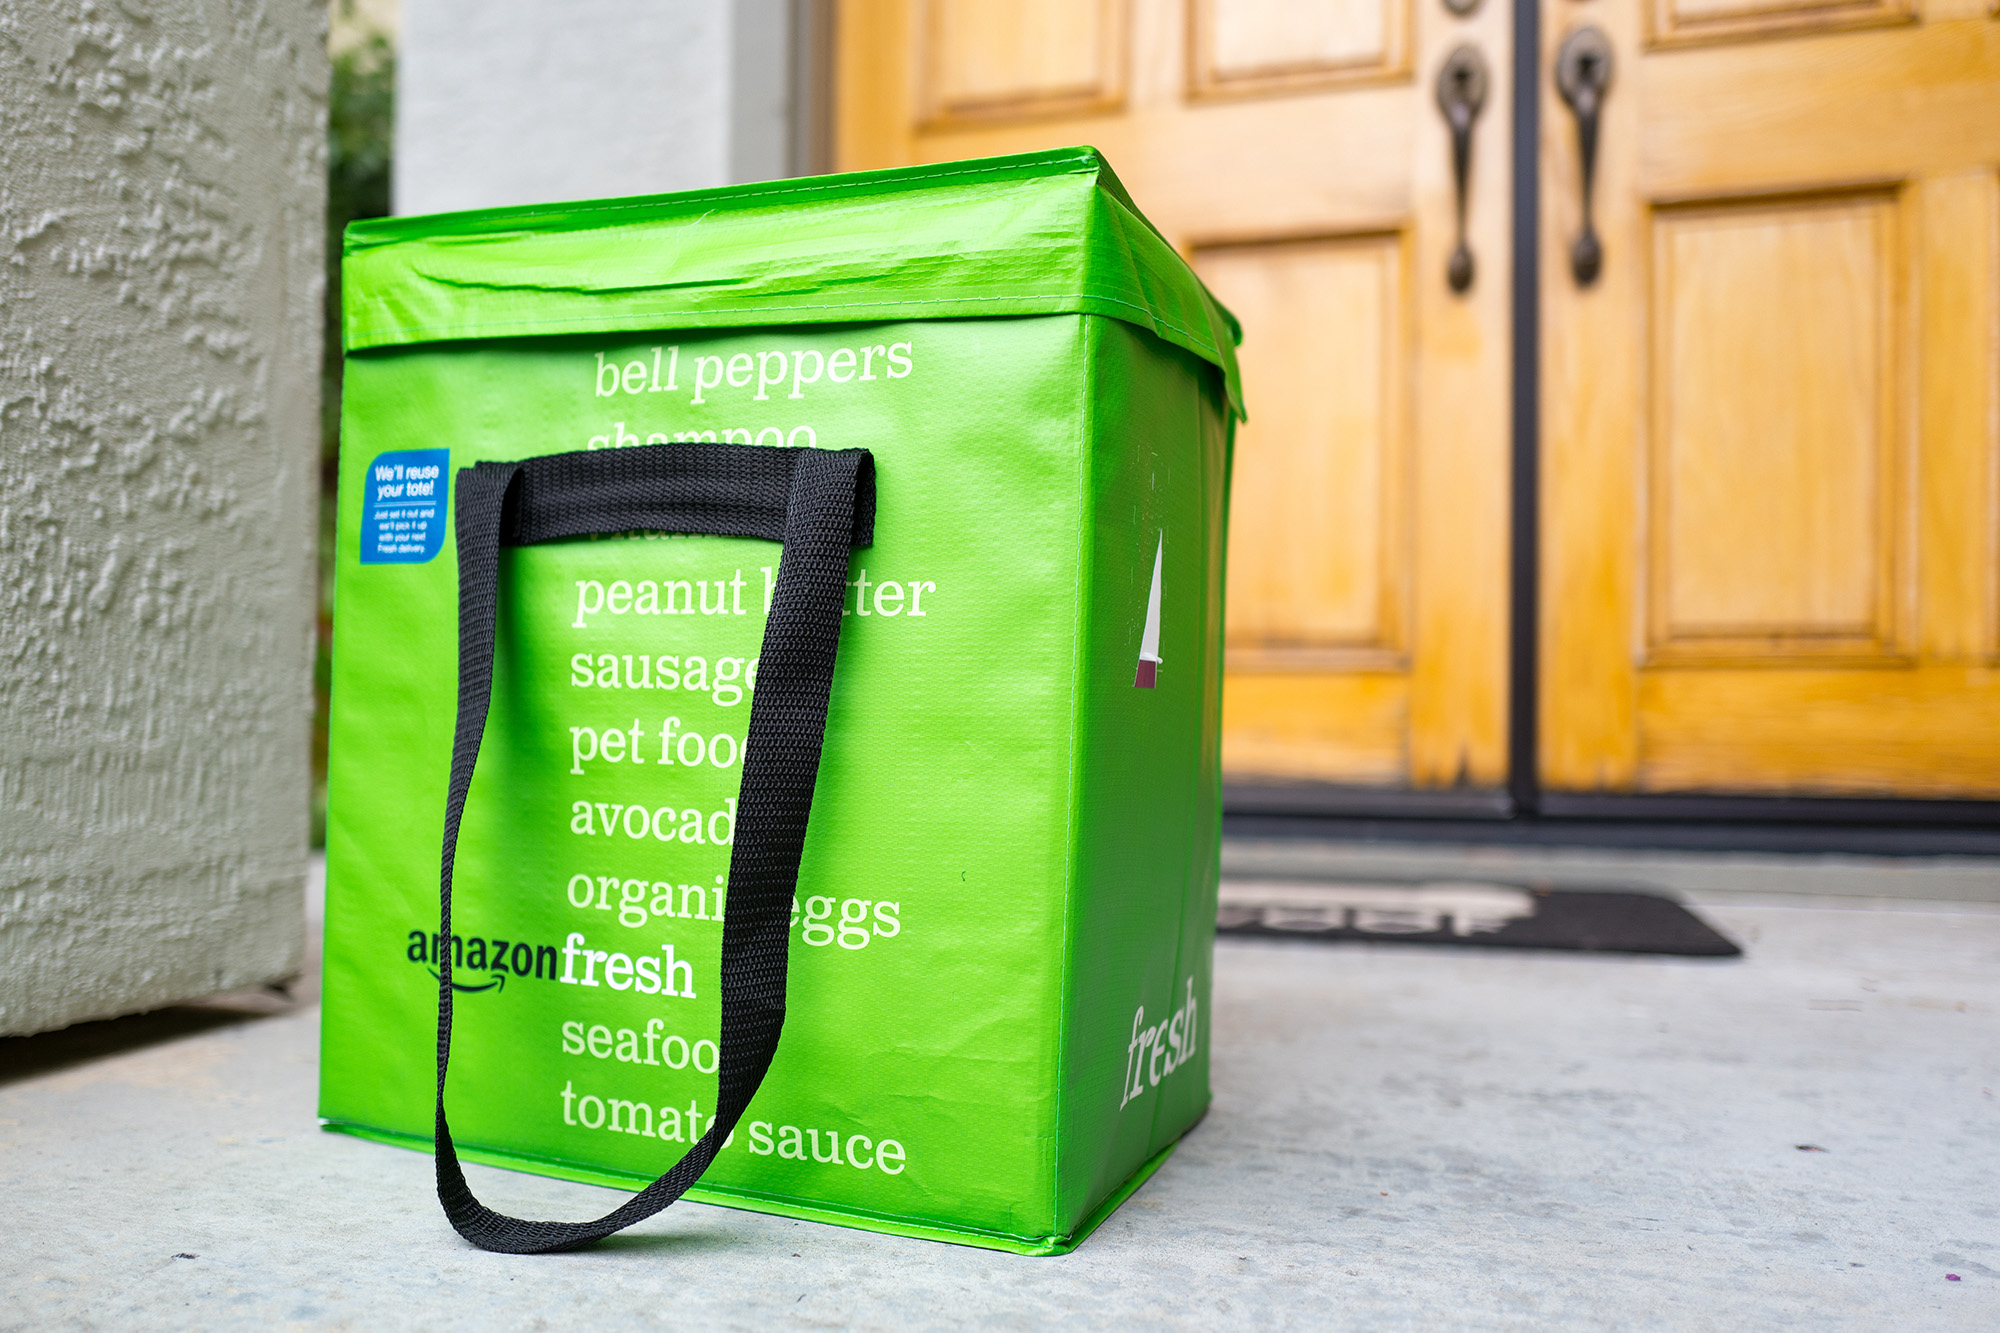 Prime Adds Free Whole Foods Grocery Delivery